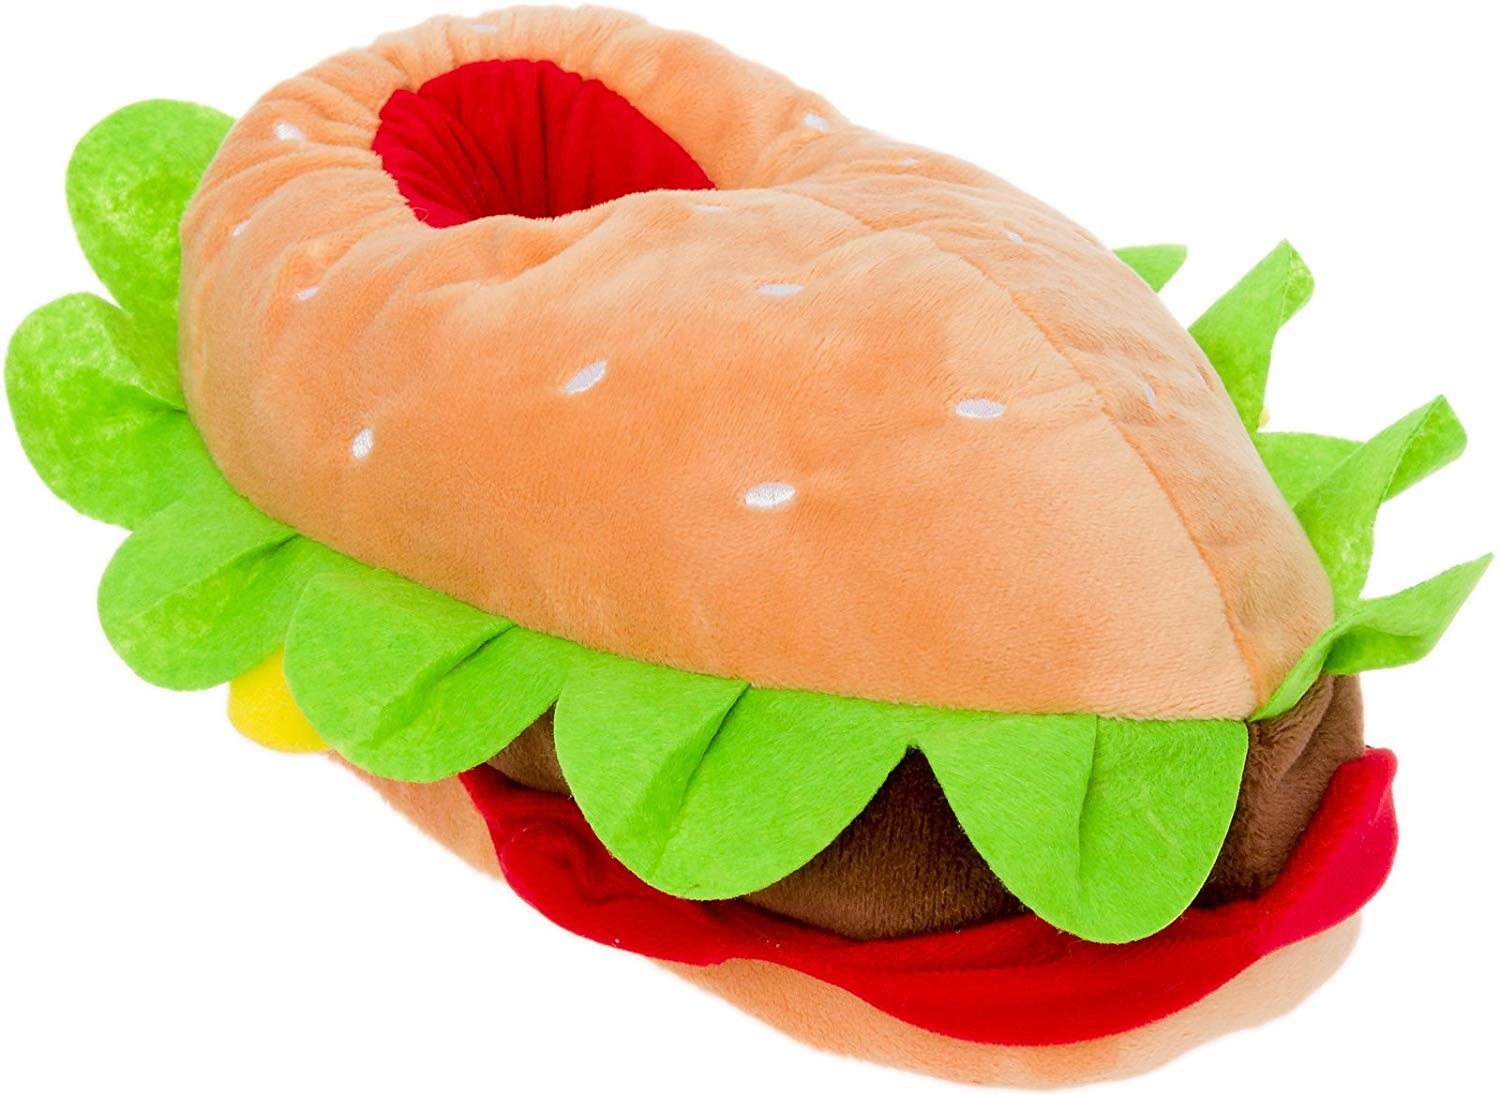 The slippers, which are shaped like hamburgers